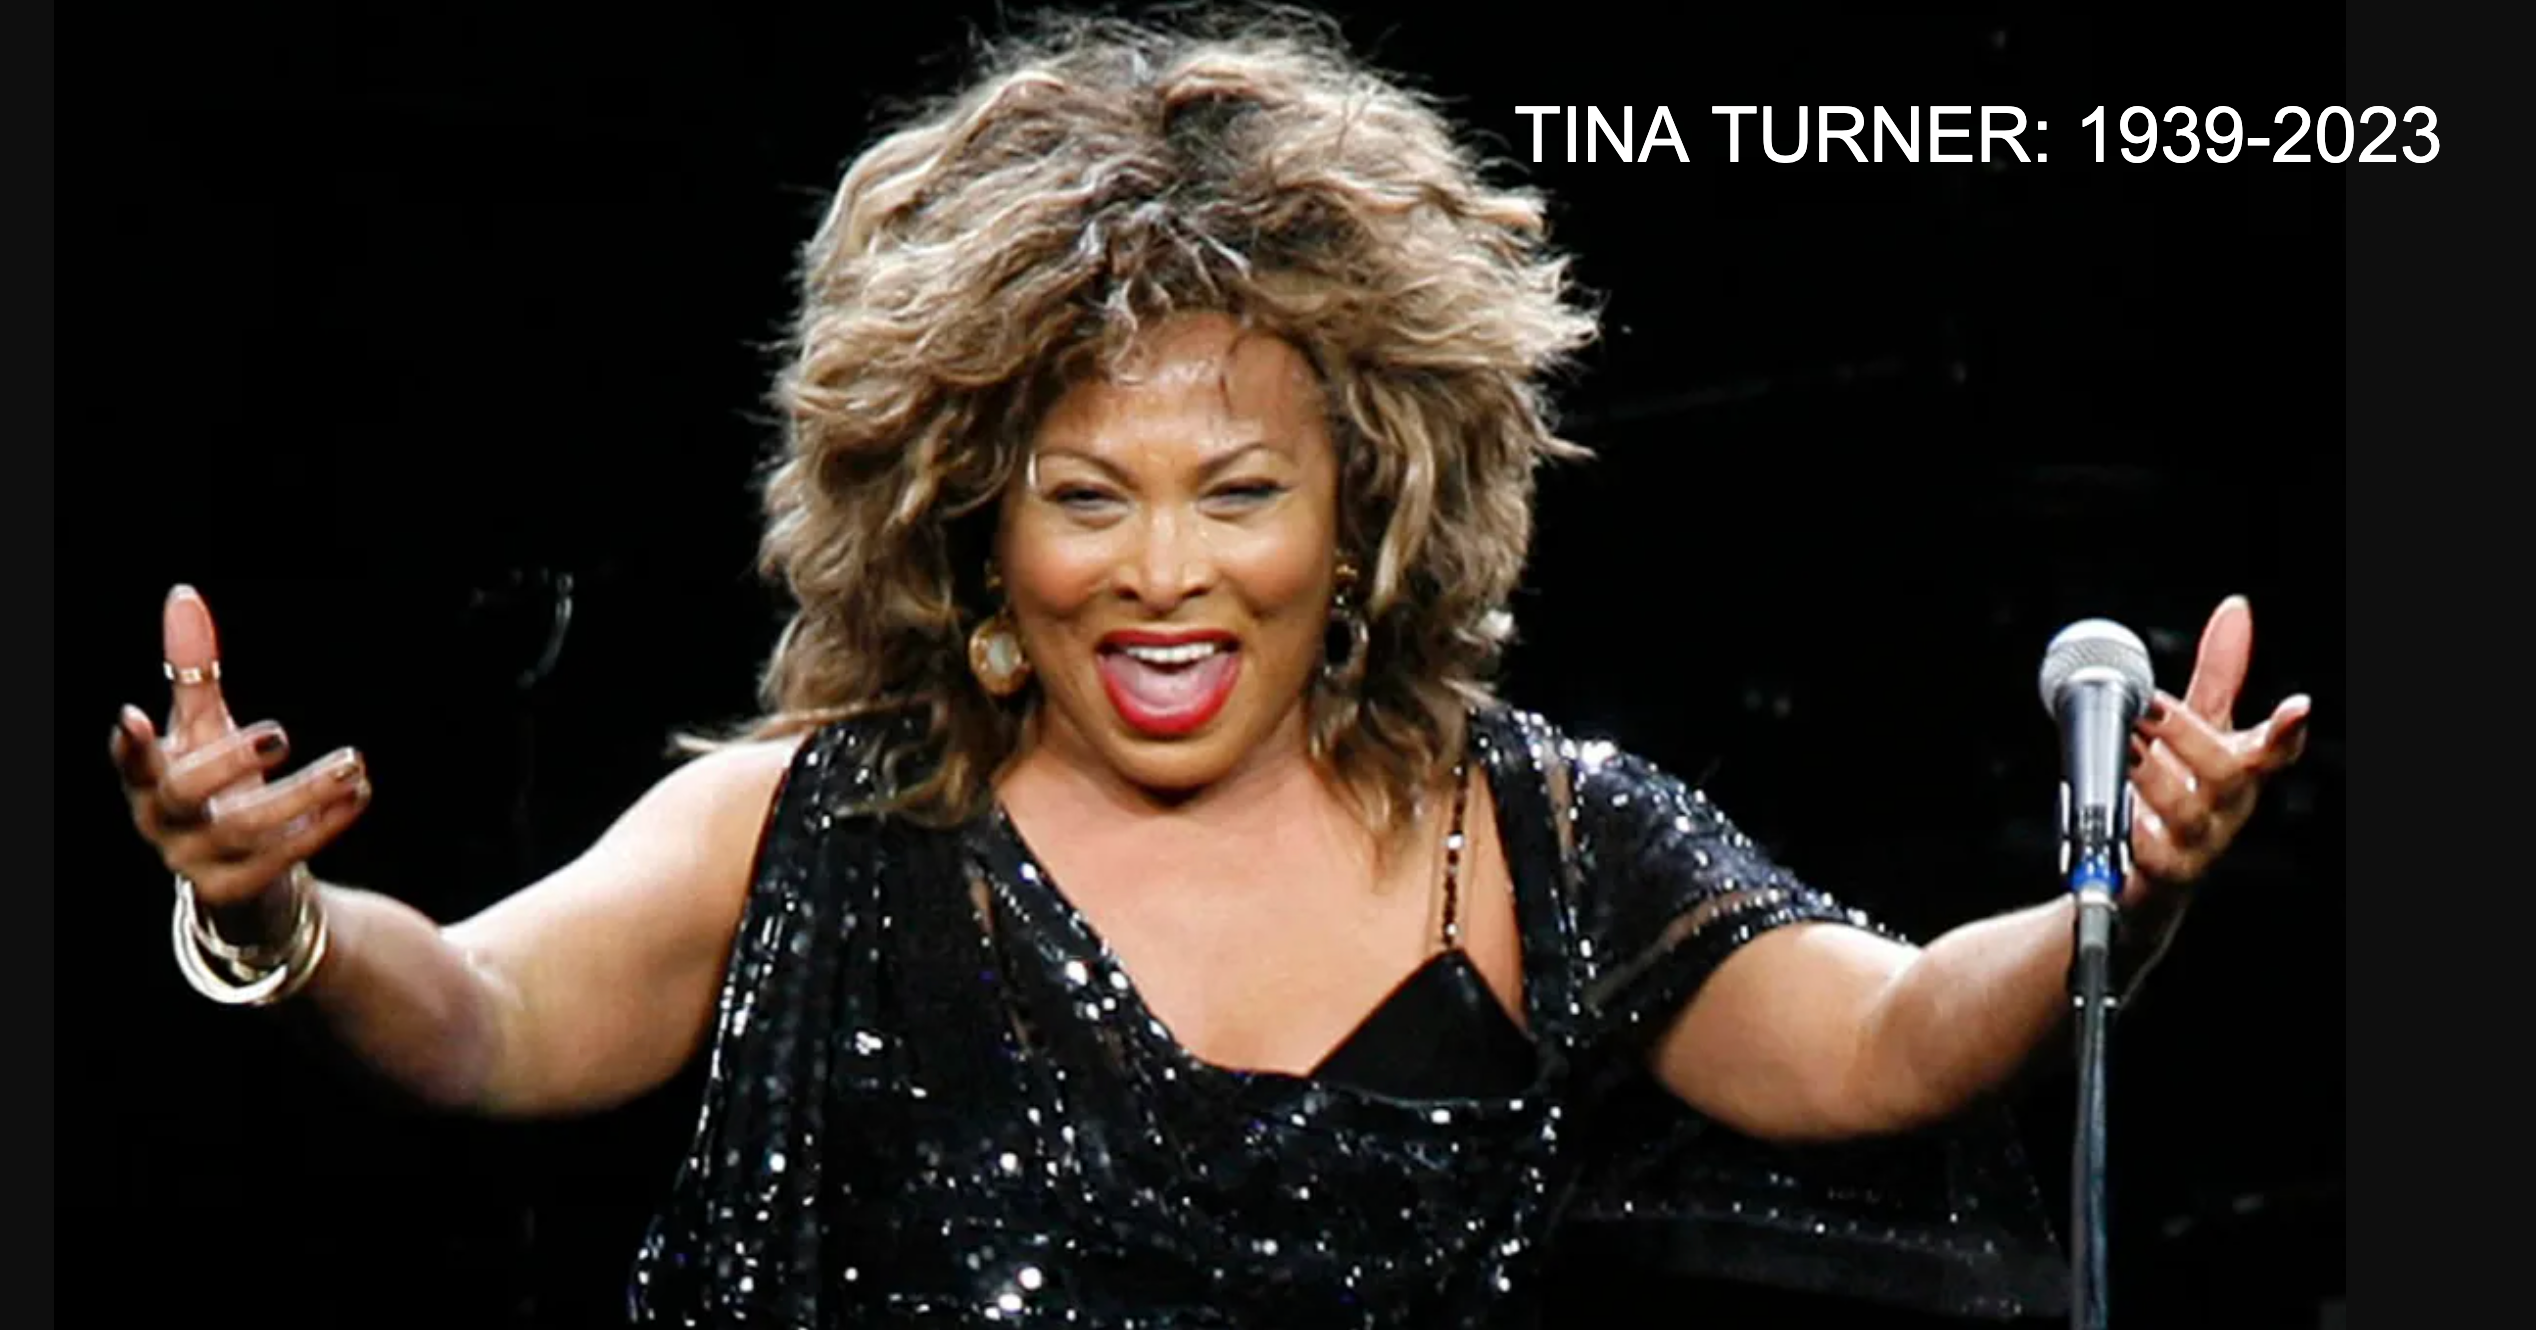 Tina Turner age at the time of death